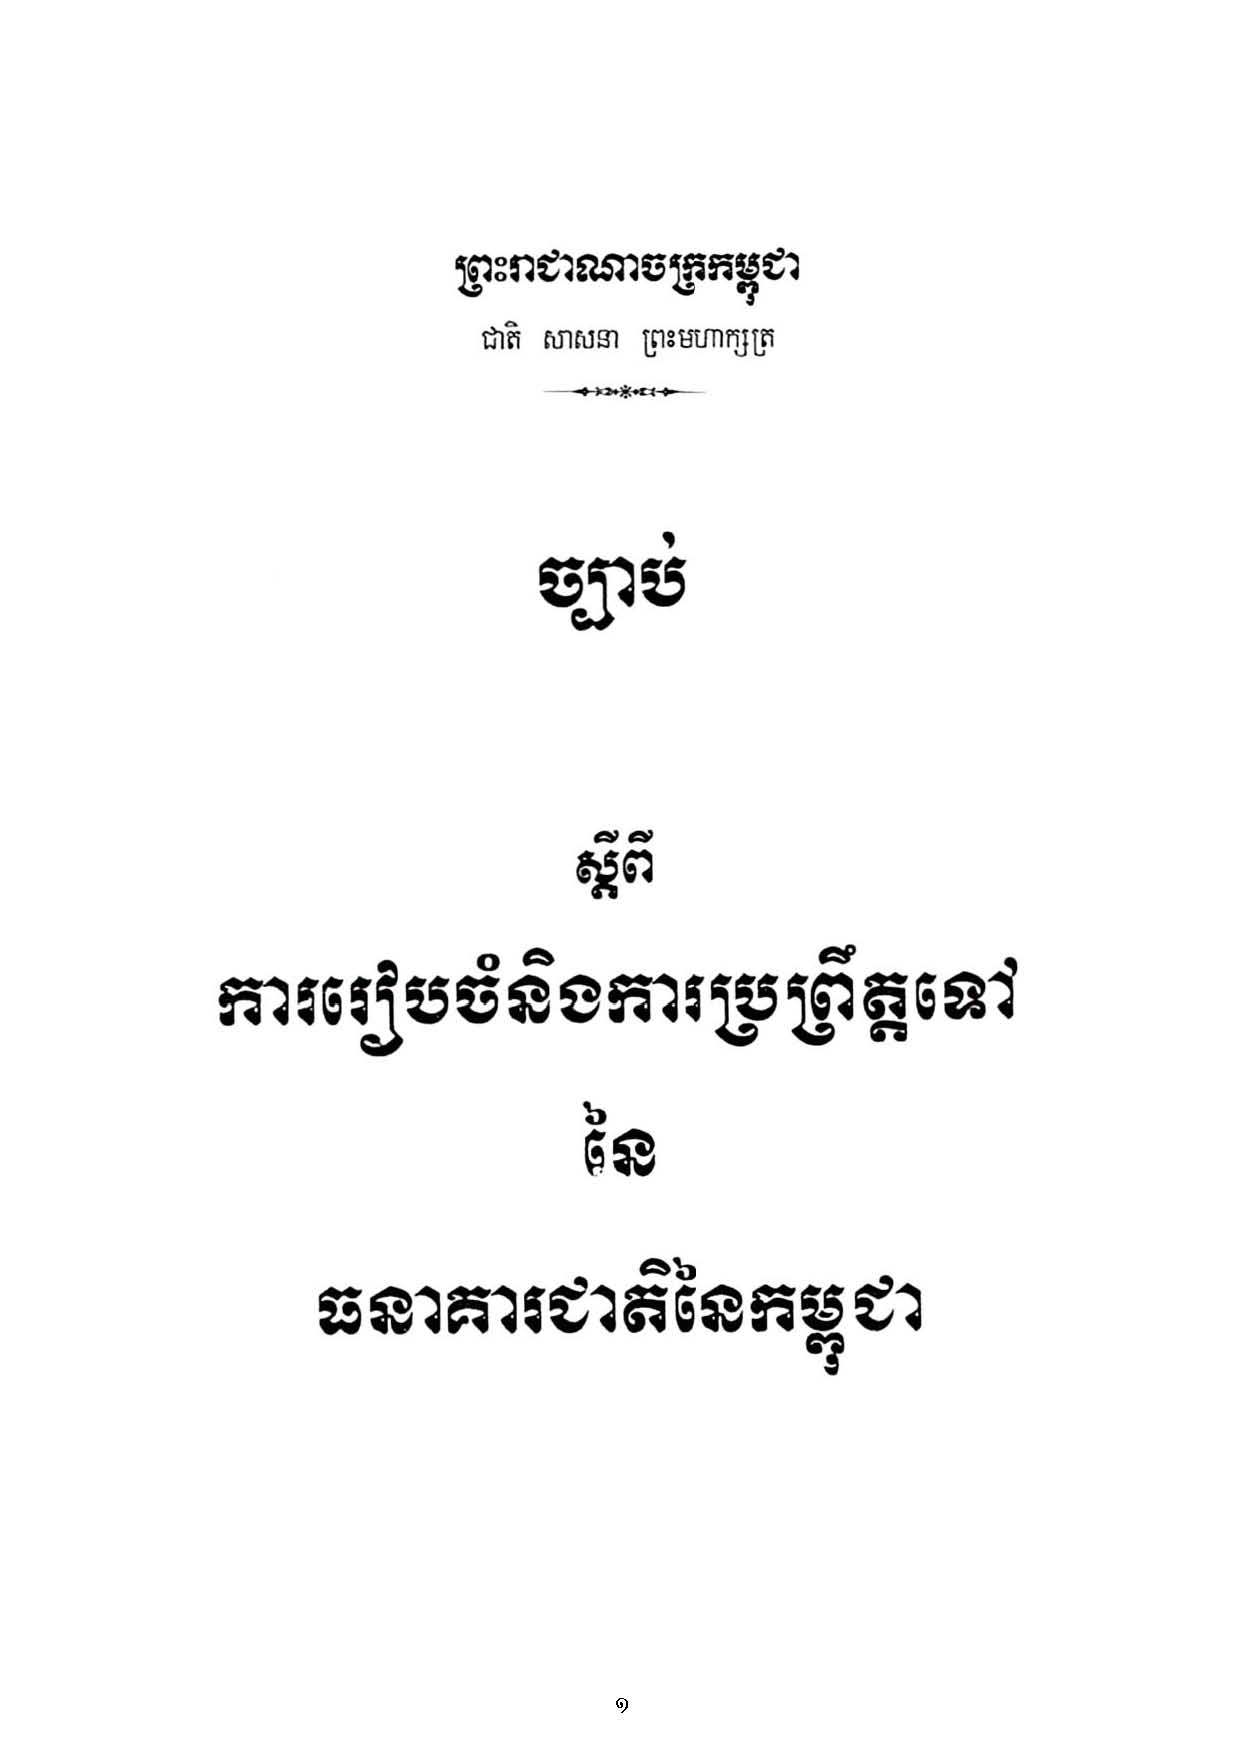 Law on the Organization and Conduct of the National Bank of Cambodia (1996)